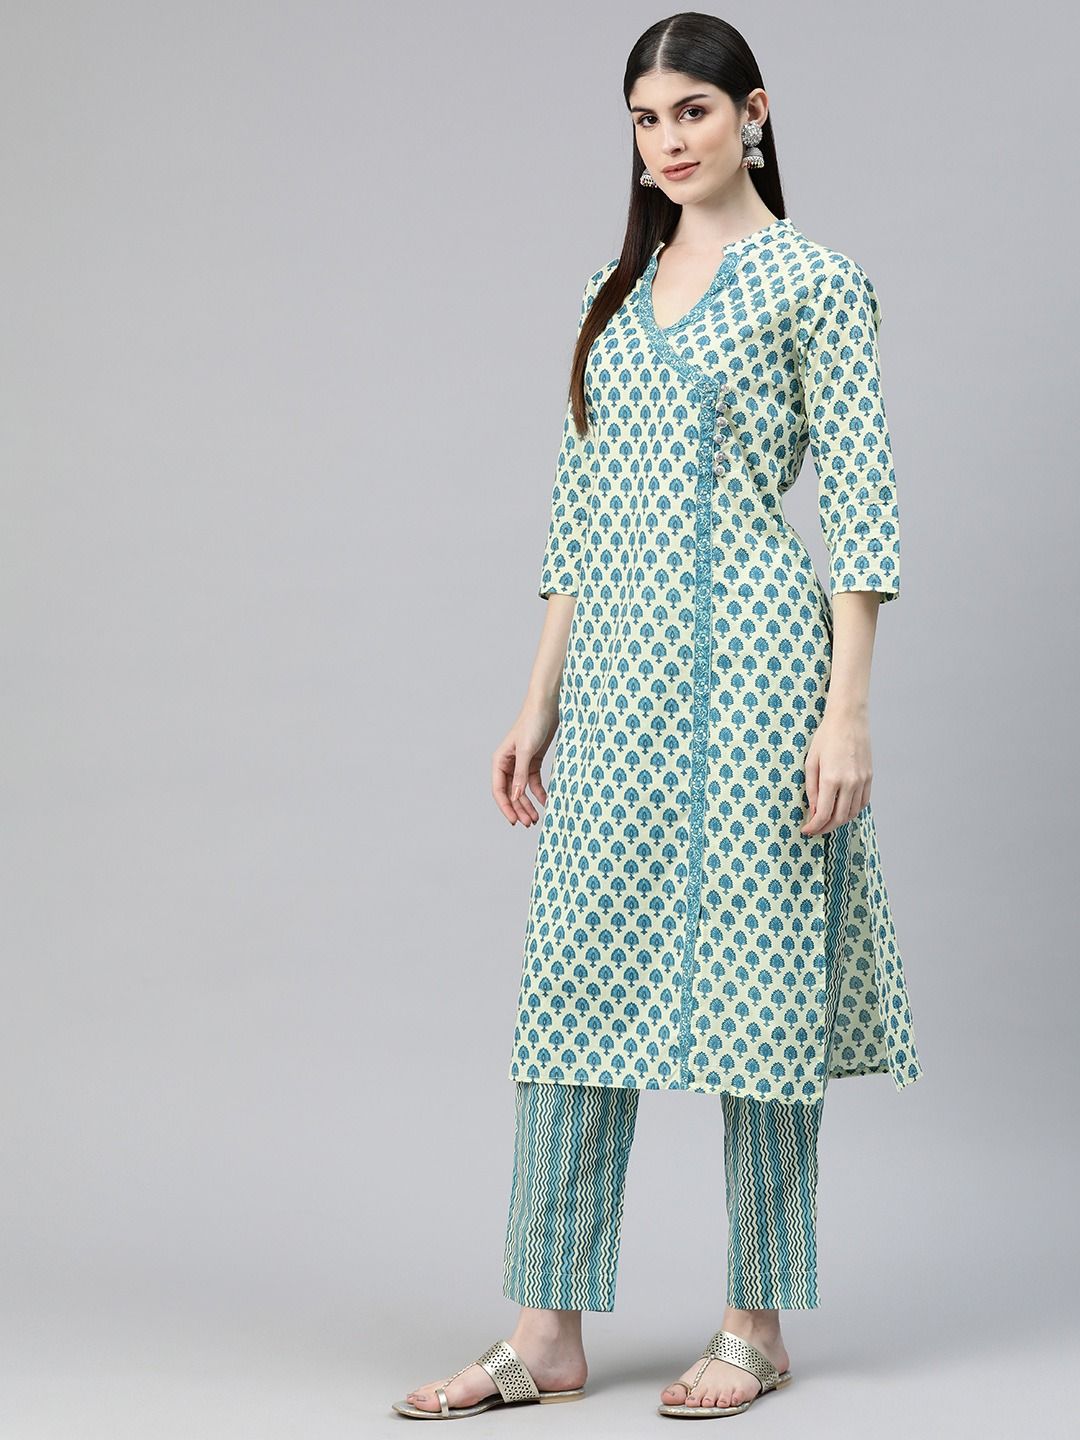 Straight Style Cotton Fabric Blue Color Printed Kurti And Bottom With Dupatta